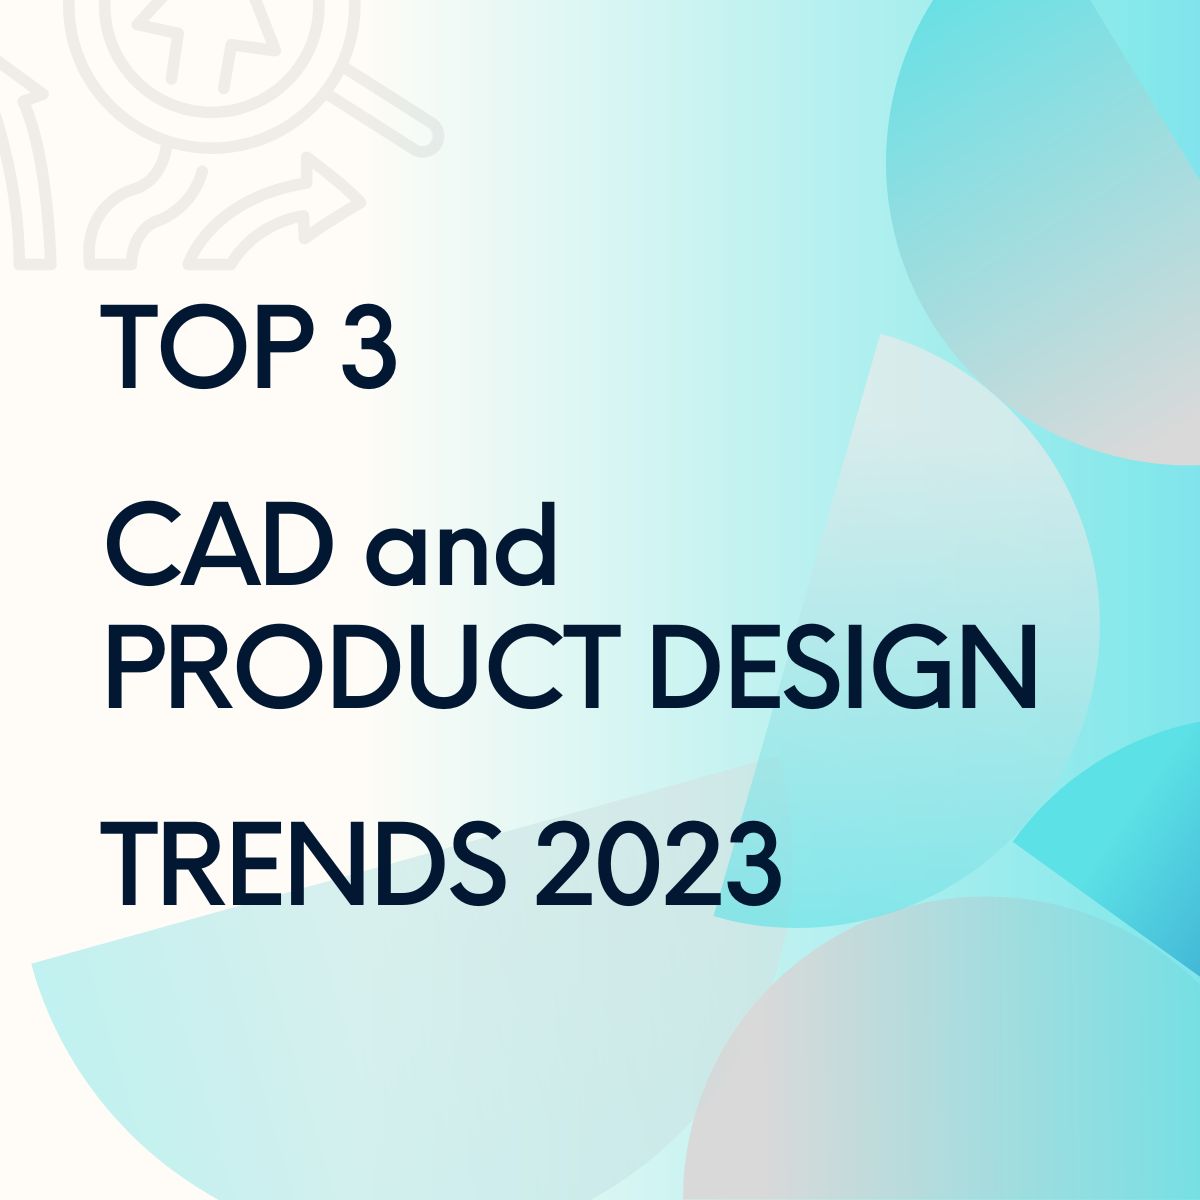  CAD and Product Design Trends 2023